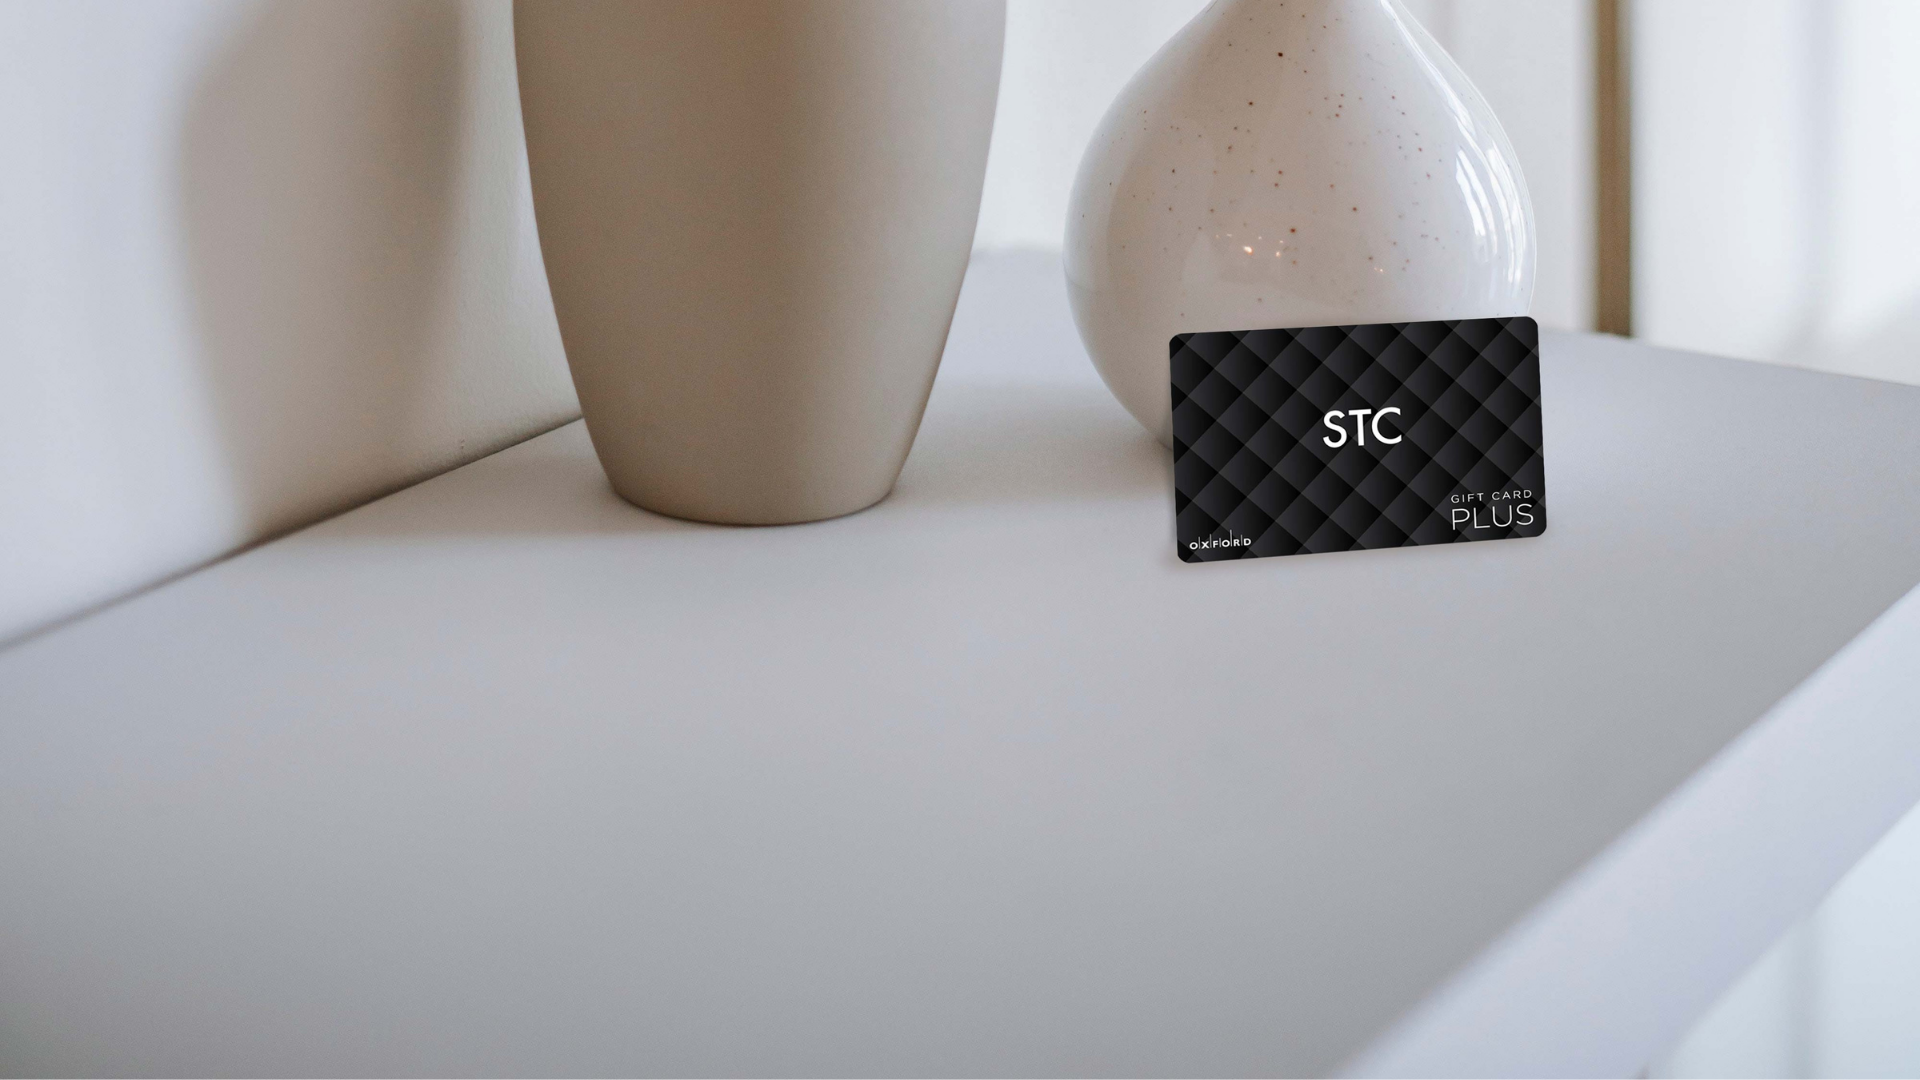 STC Gift Card Image, Black STC Gift Card, Beige pot